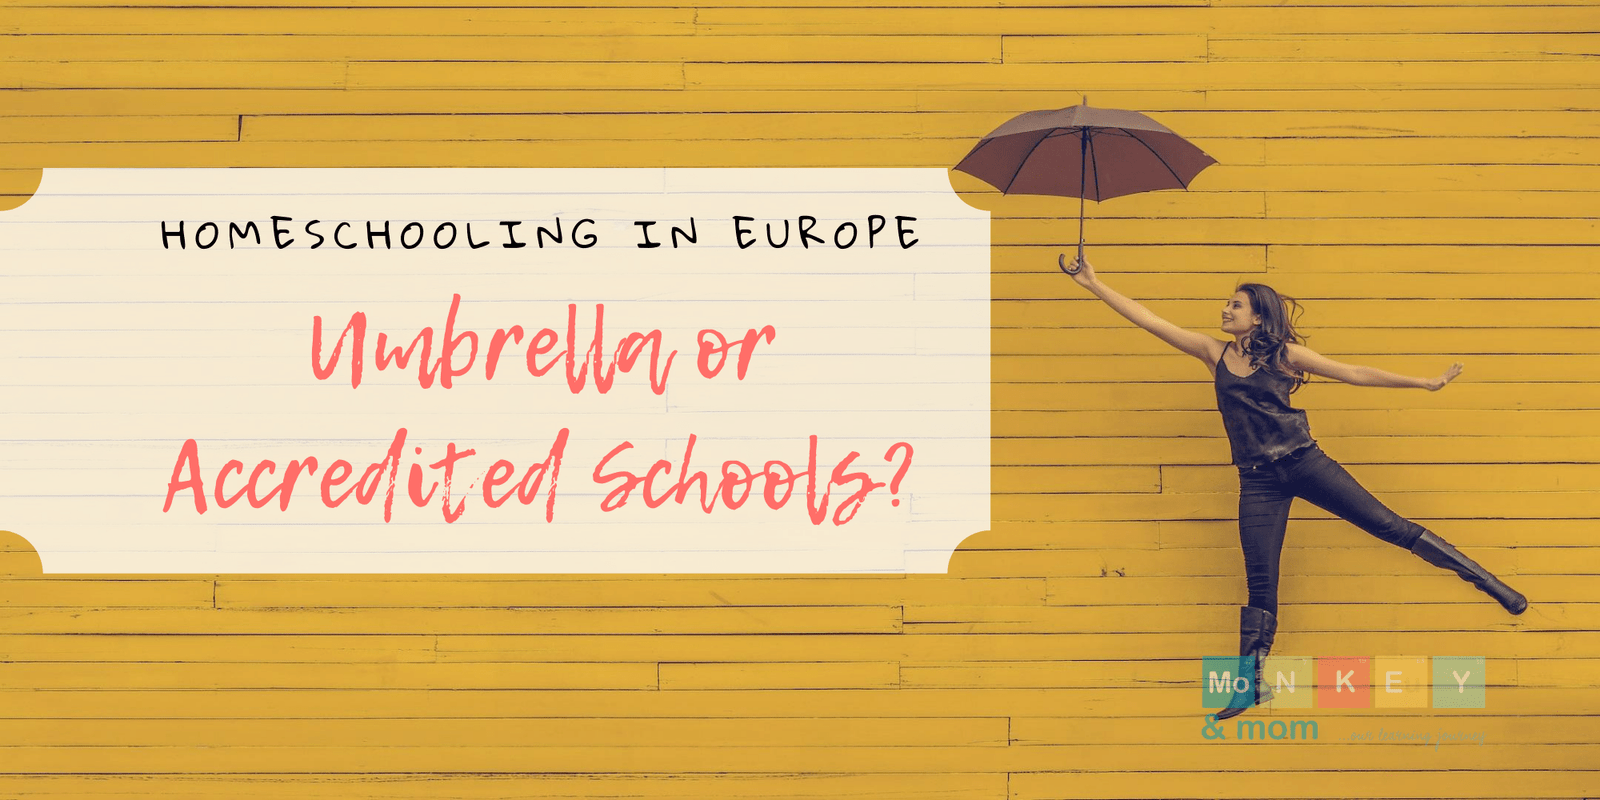 Homeschooling in Europe – picking an accredited or an umbrella school